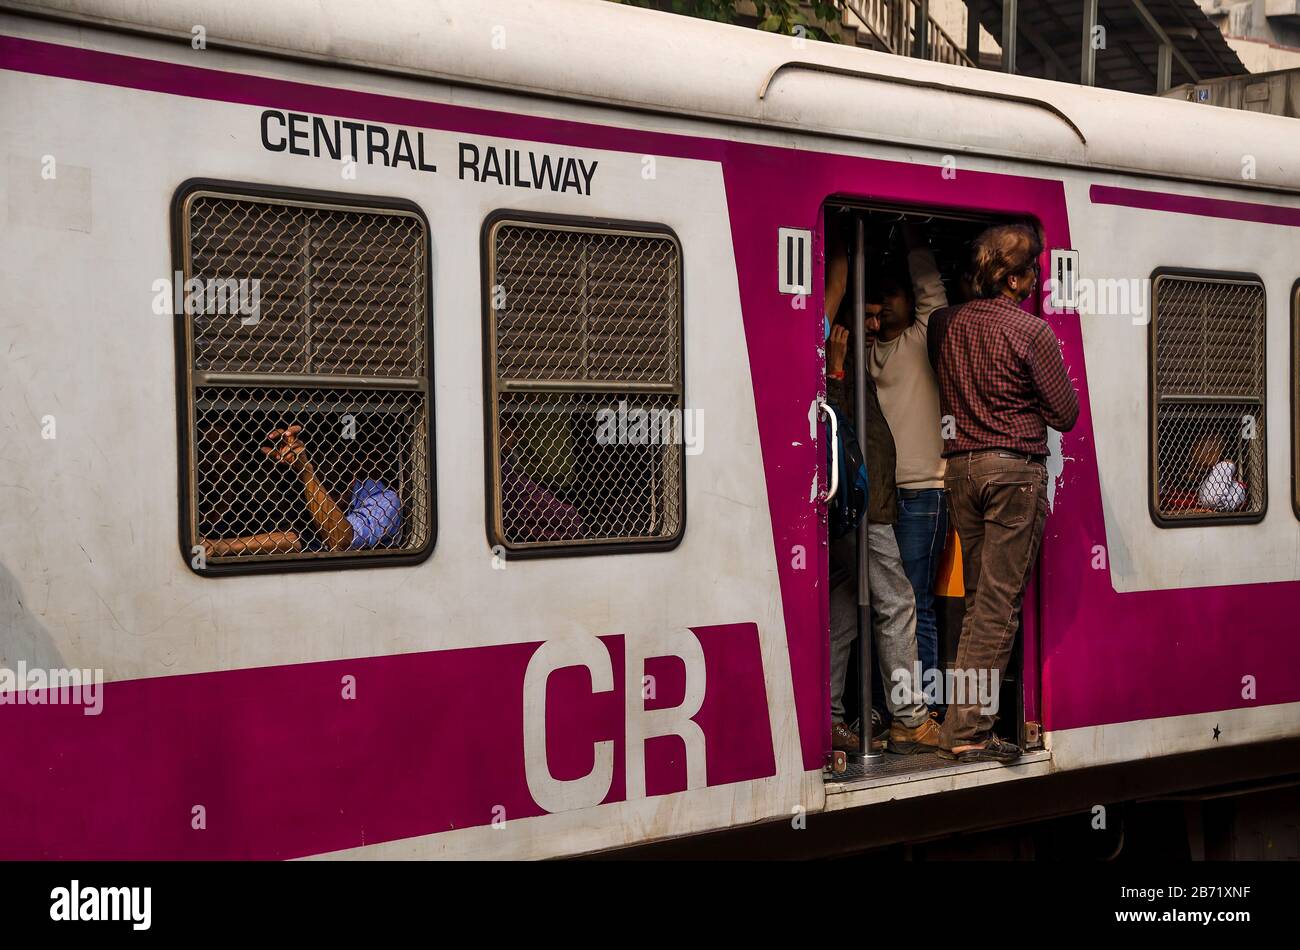 MUMBAI, INDIA – DEC. 19, 2019 : Mumbai Suburban Railway Train, one of the busiest and always overcrowded commuter rail systems in the world. Stock Photo